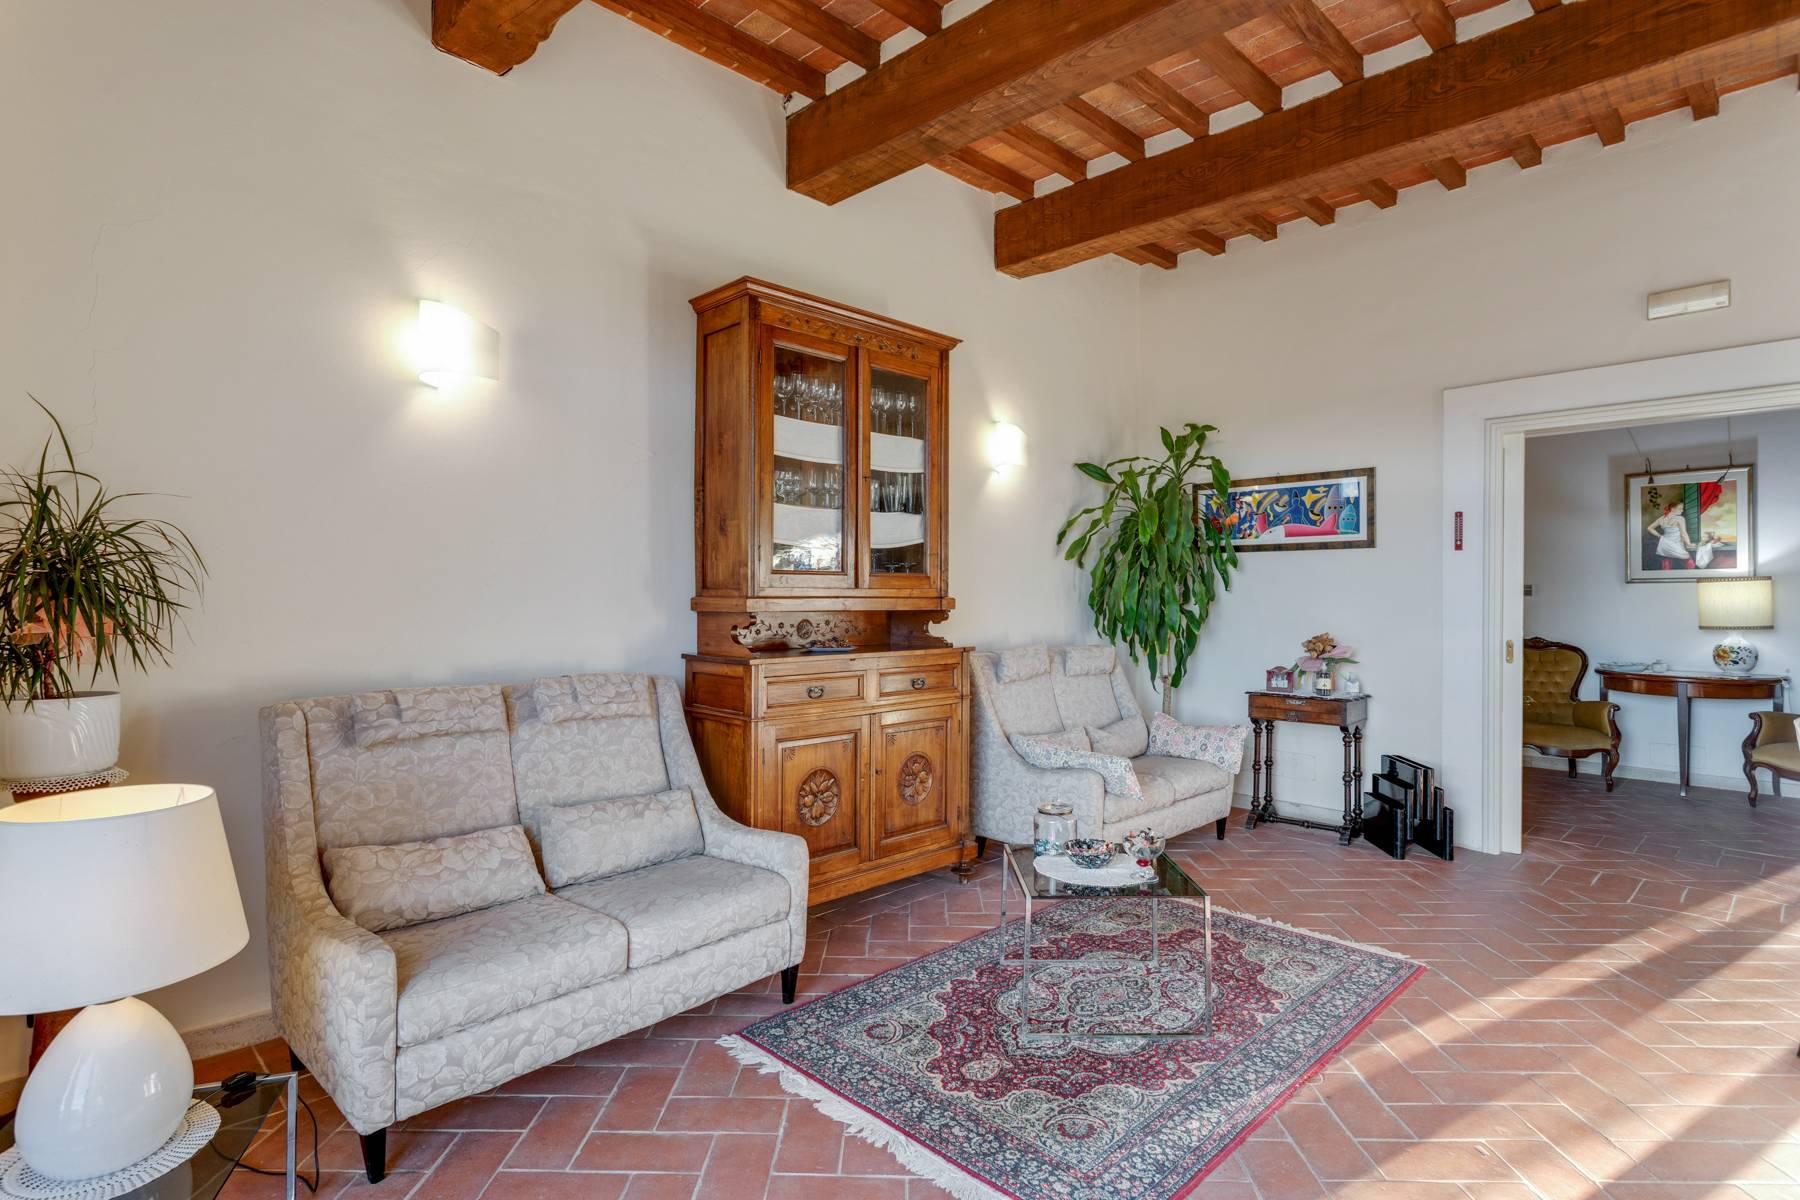 Beautiful country house with agriturismo and vineyard walking distance from Montepulciano - 16